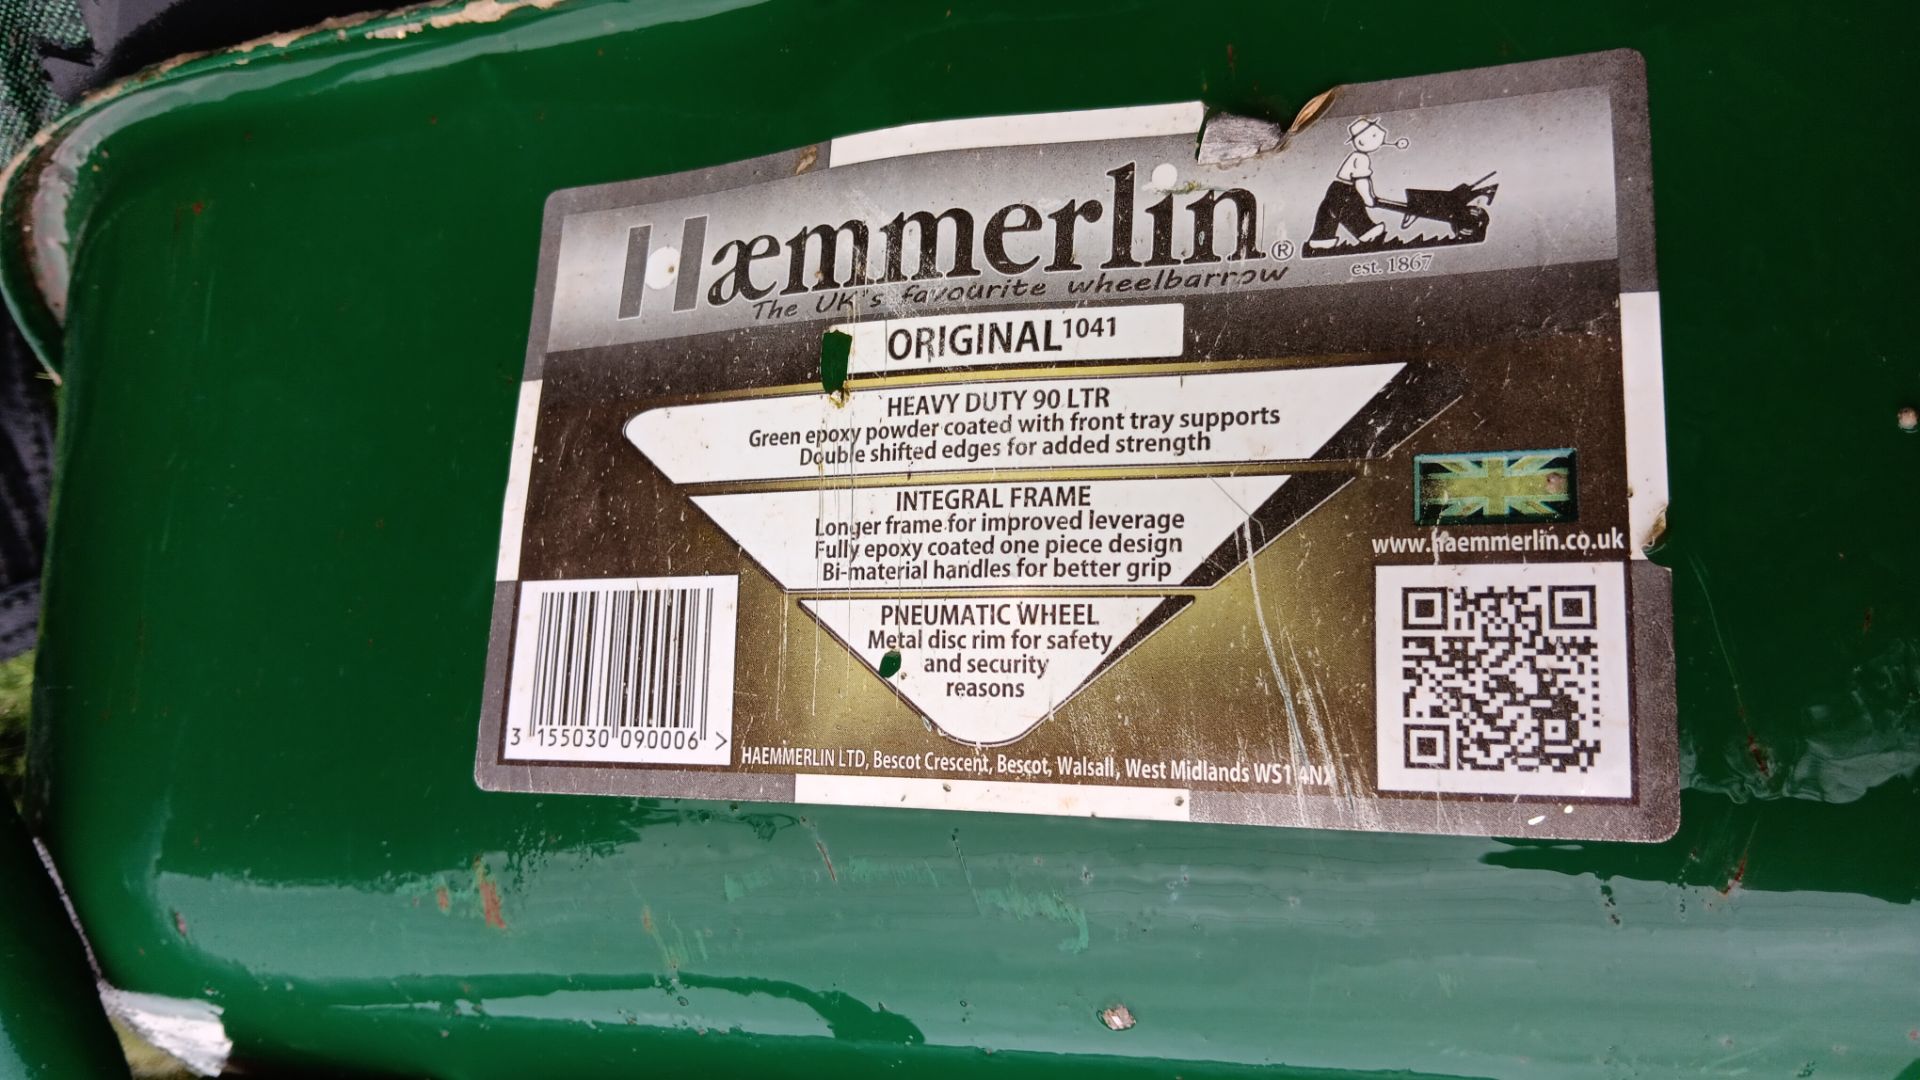 2 x Haemmerlin Original 1041 90 litre wheel barrows (contents excluded) - Image 2 of 2